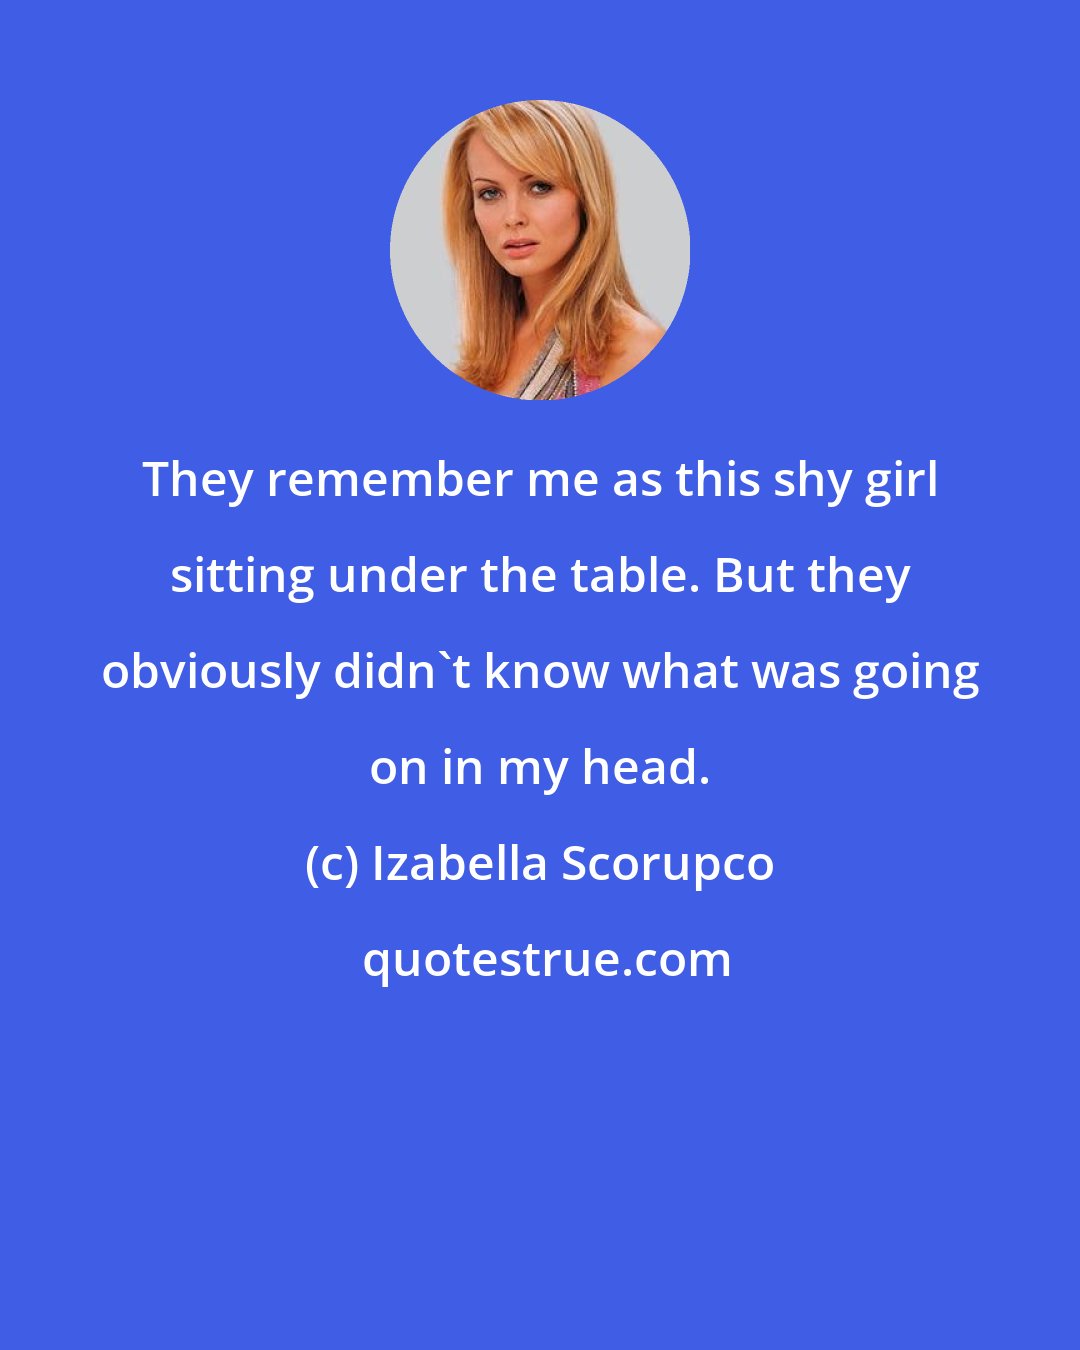 Izabella Scorupco: They remember me as this shy girl sitting under the table. But they obviously didn't know what was going on in my head.